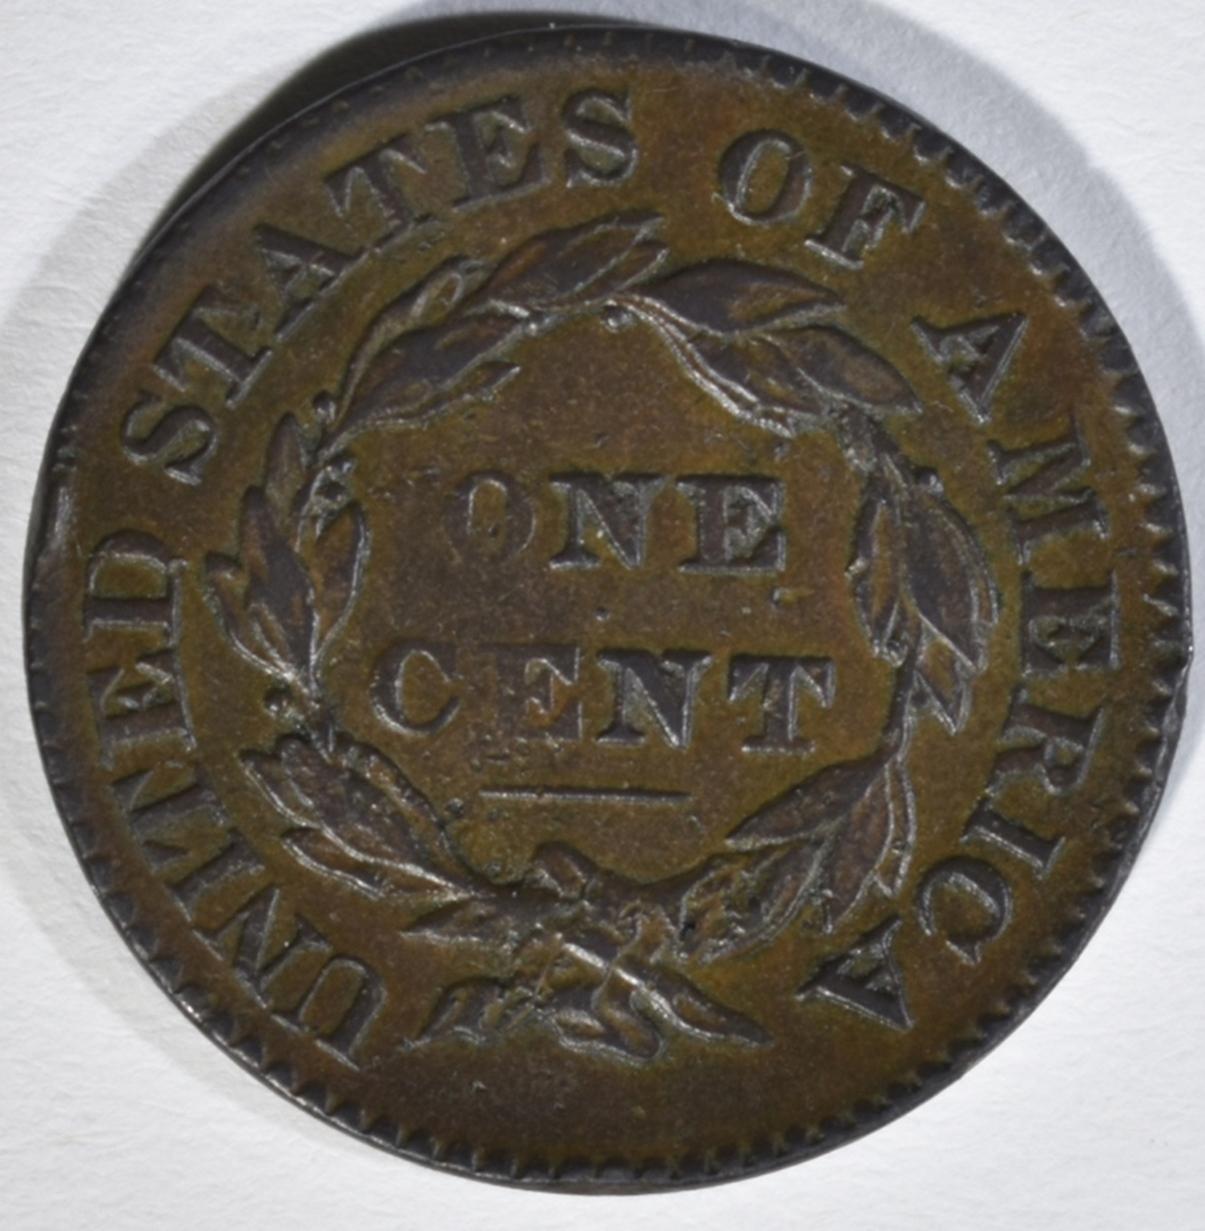 1828 LARGE CENT, SMALL WIDE DATE, XF SCARCE!